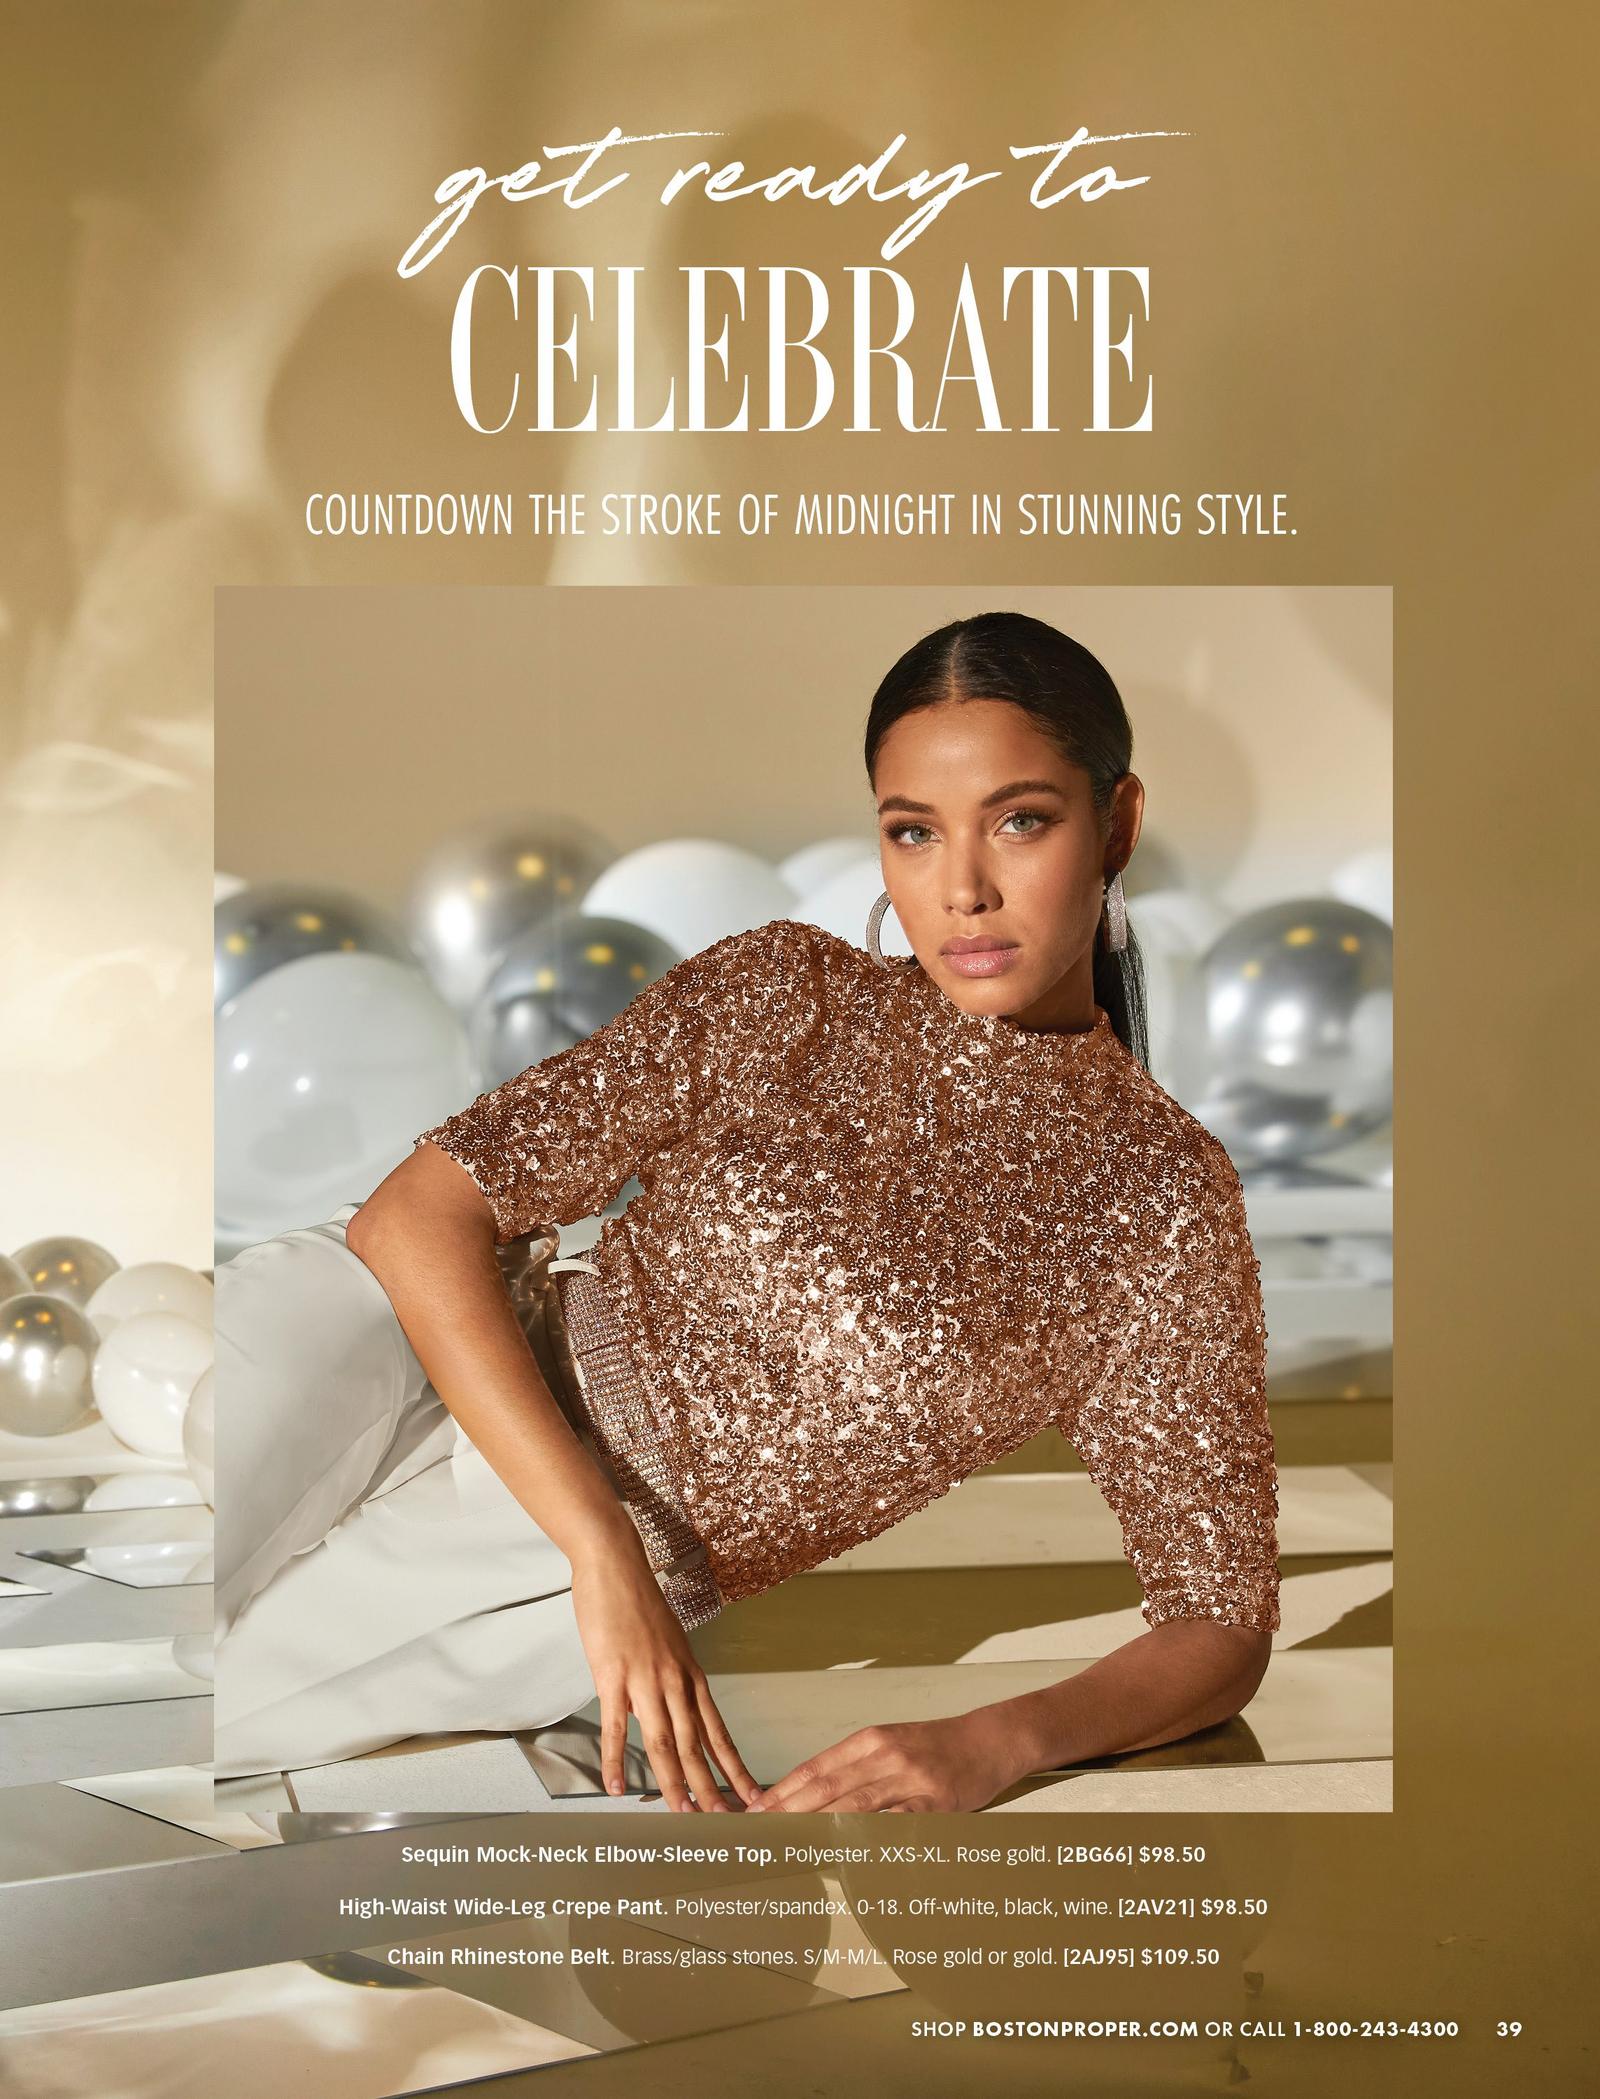 model wearing a gold sequin mock neck elbow sleeve top, gold rhinestone belt, and white wide-leg pants.